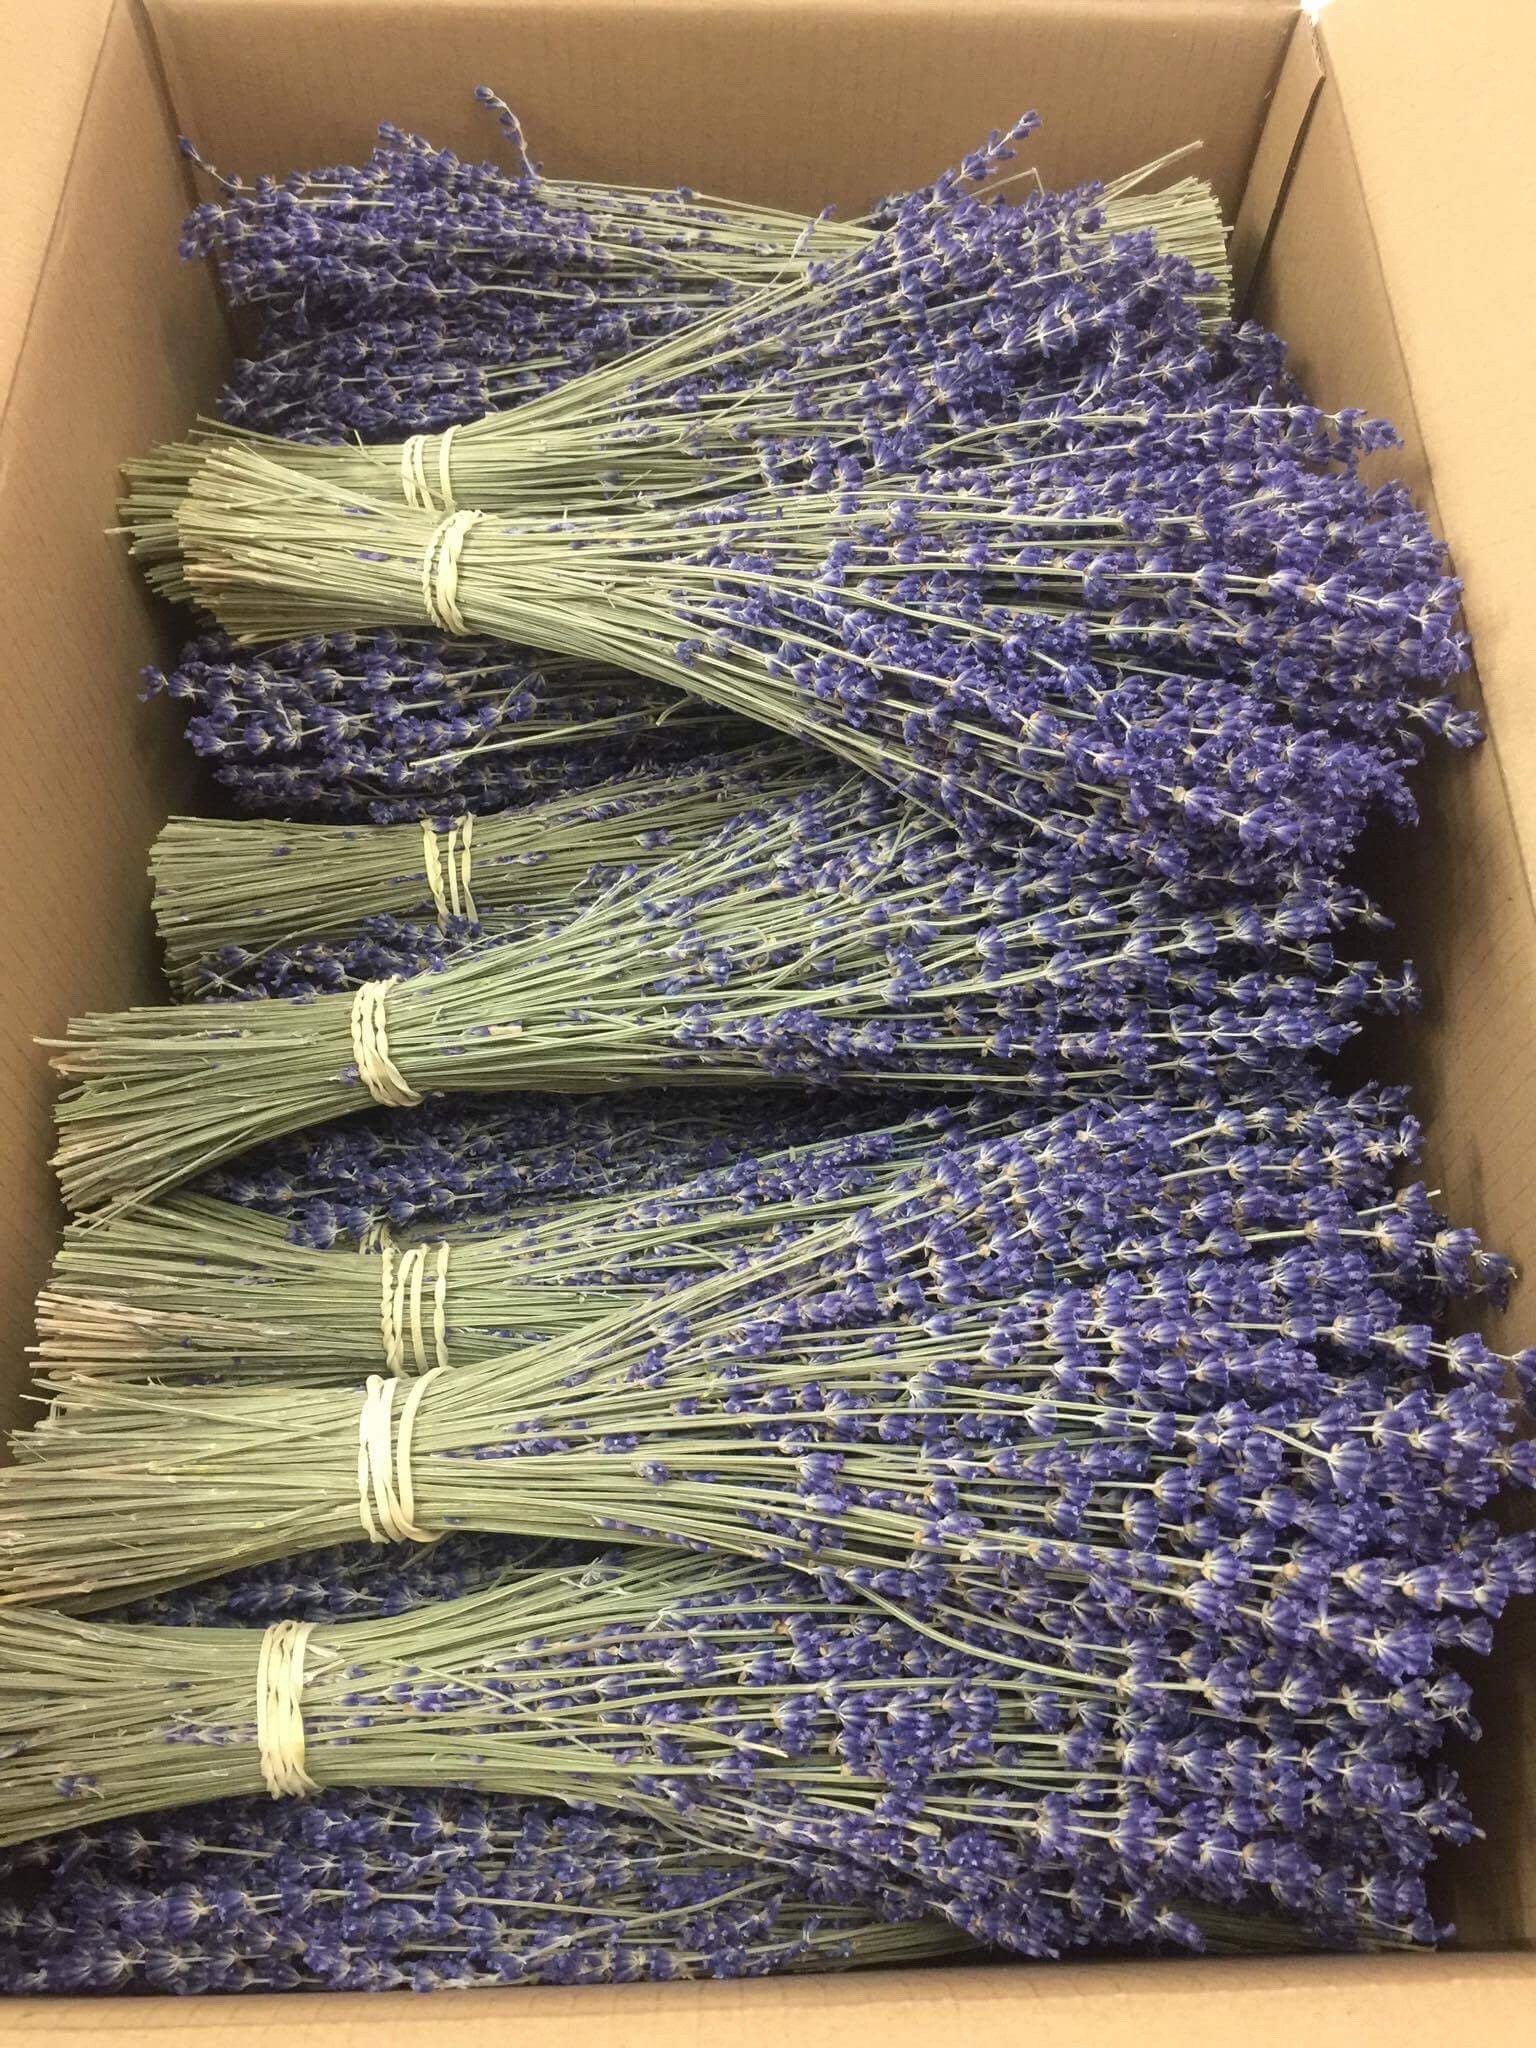 Wholesales Case of Provencial French true lavender, lavendula super blue from South of France